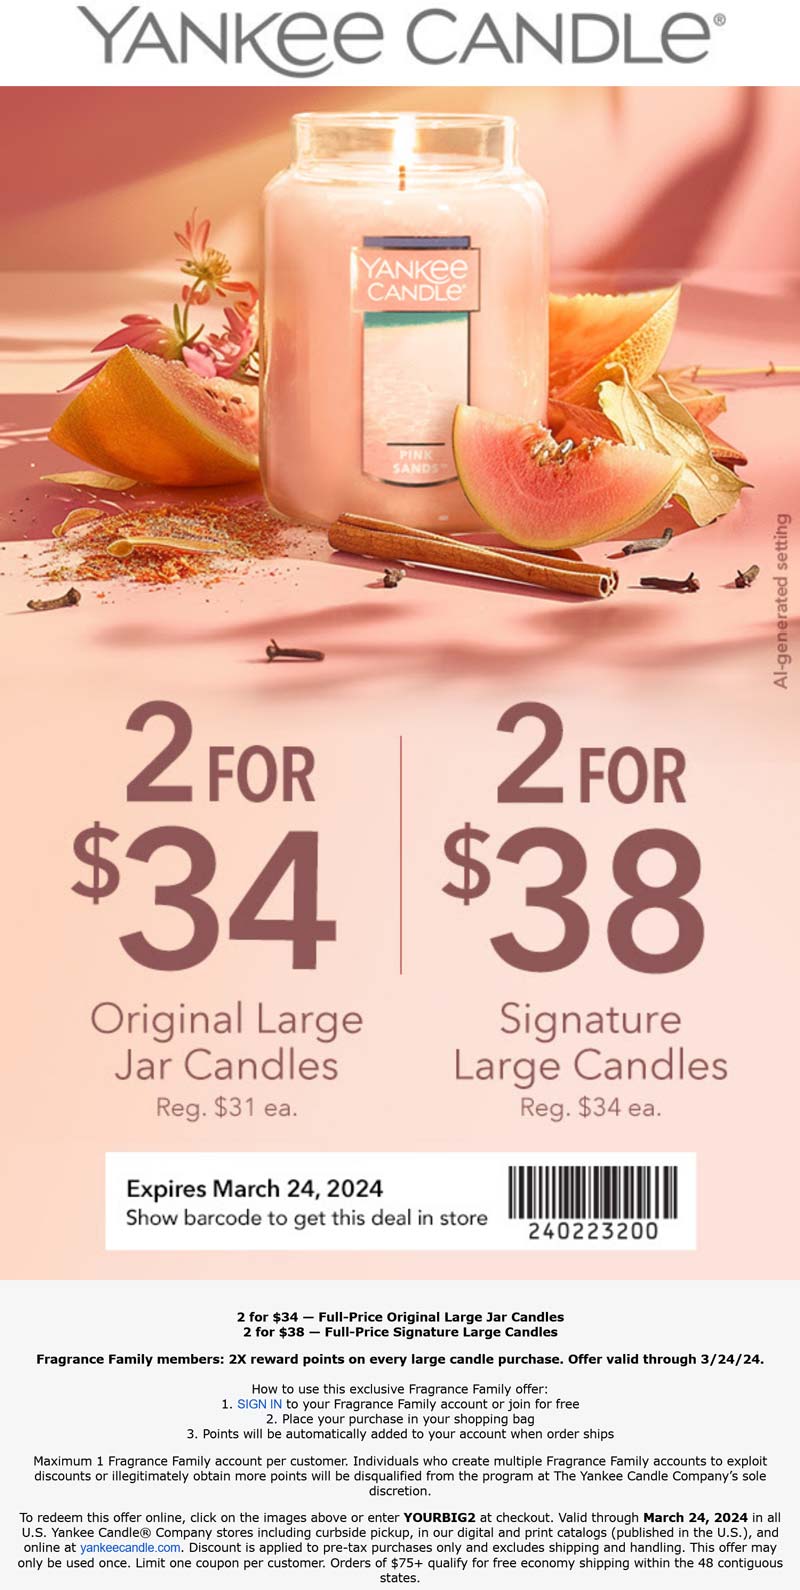 Yankee Candle stores Coupon  2 for $34 on large jar candles at Yankee Candle, or online via promo code YOURBIG2 #yankeecandle 